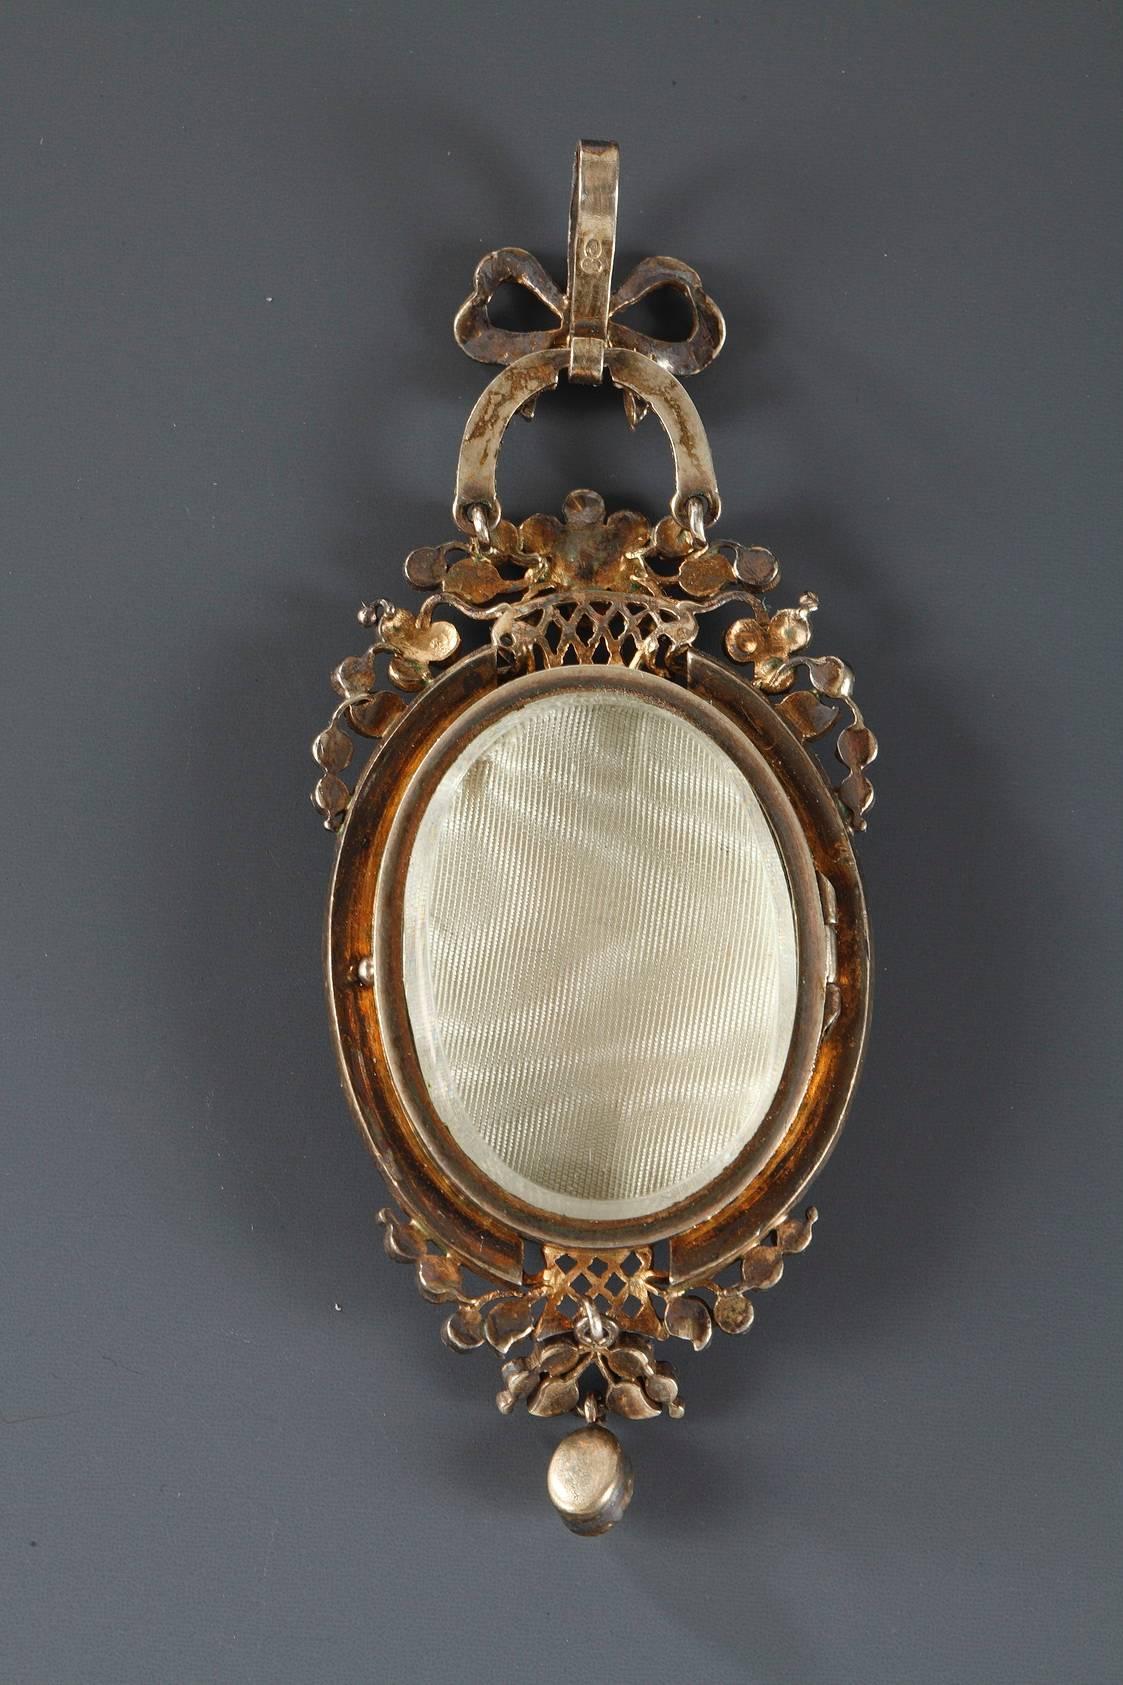 Silver-gilt pendant featuring a mythological scene on enamel representing La Fontaine de l’Amour (The Fountain of Love) after Jean-Honoré Fragonard. The setting is meticulously executed, embellished with delicate pearls, rubies, and emeralds that